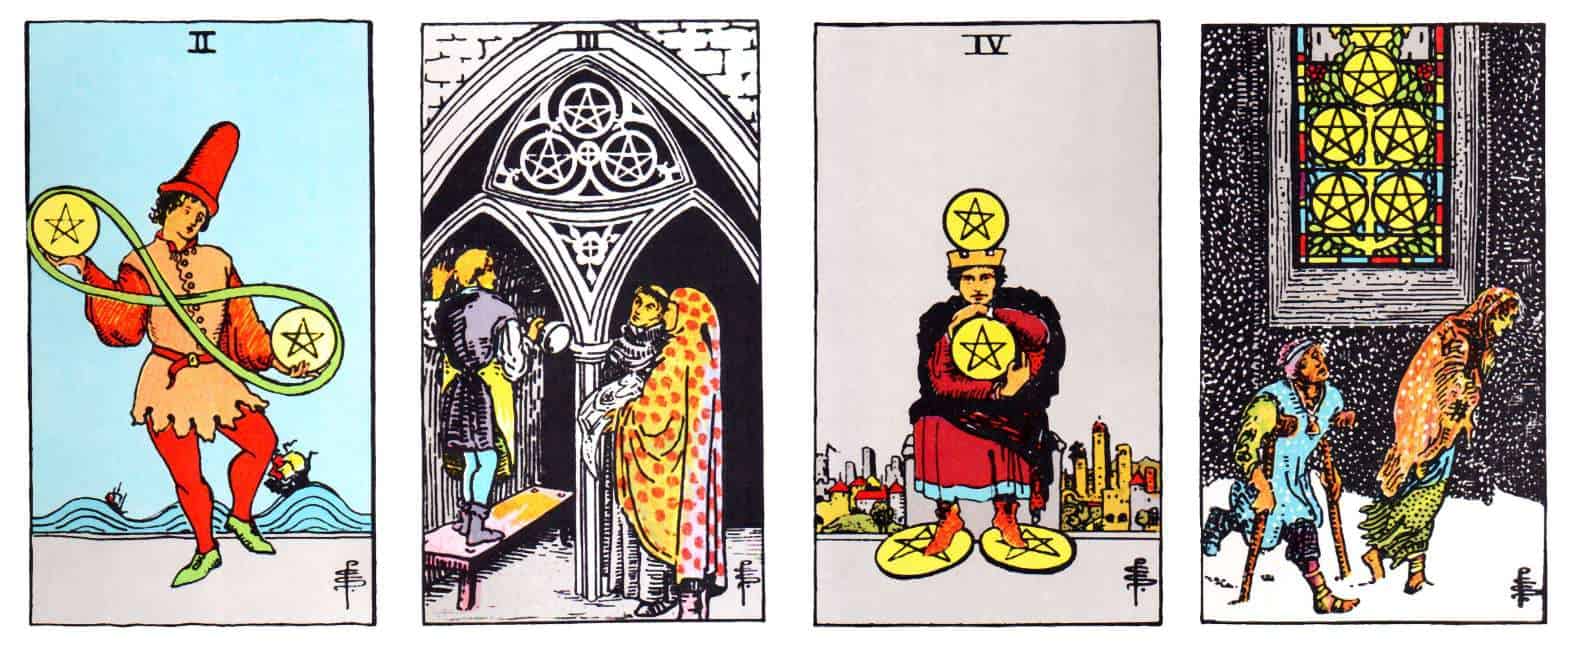 minor arcana suits of pentacles